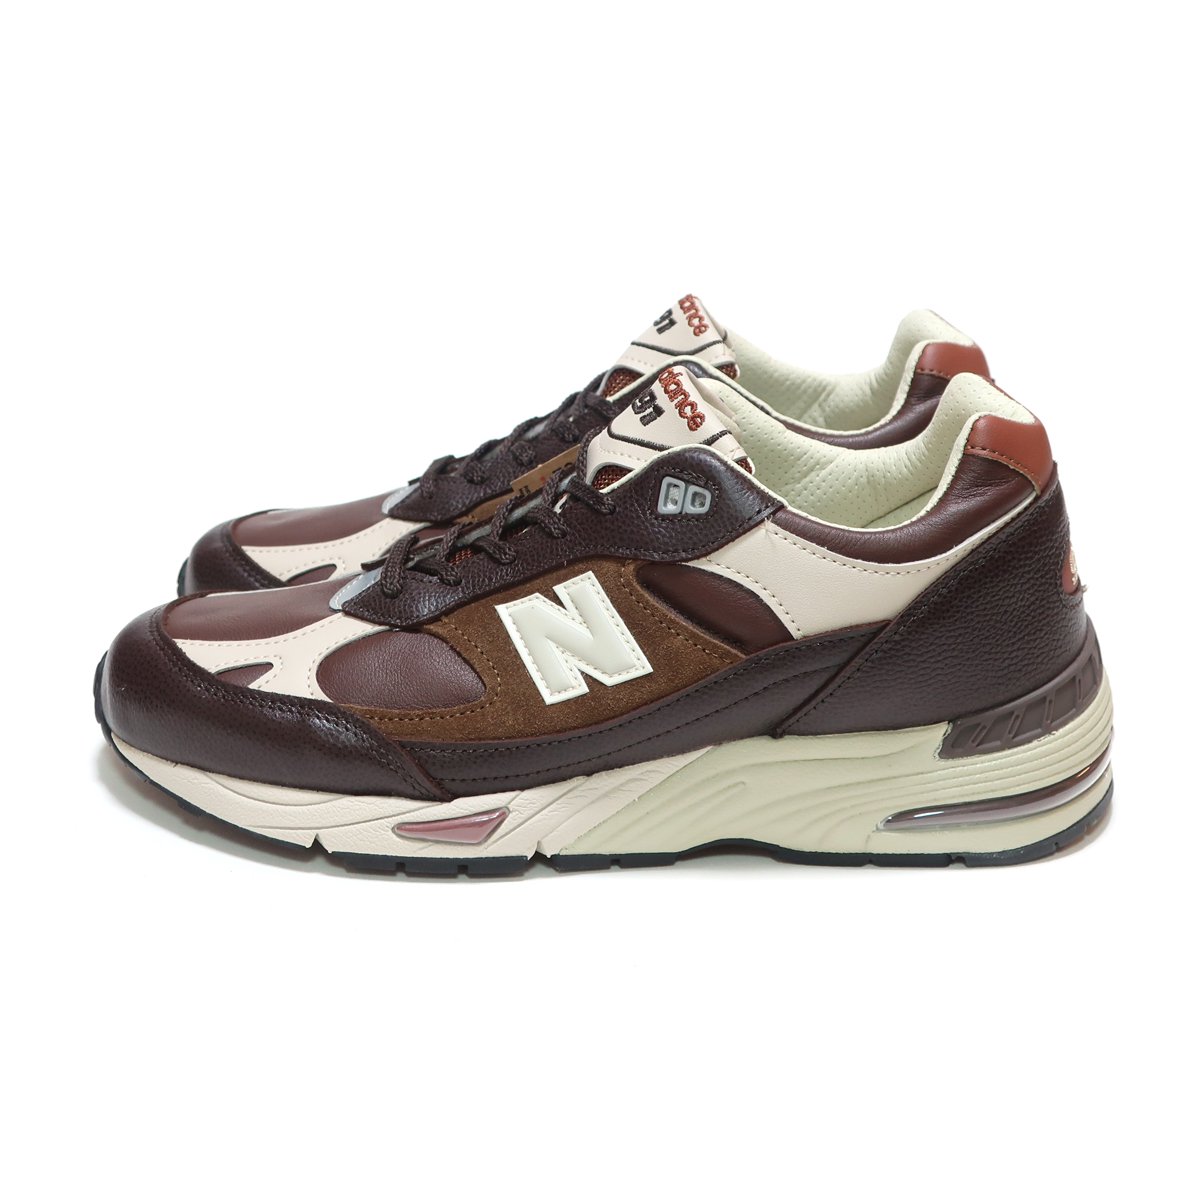 NEW BALANCE M991GBI BROWN LEATHER MADE IN ENGLAND ( ニューバランス 